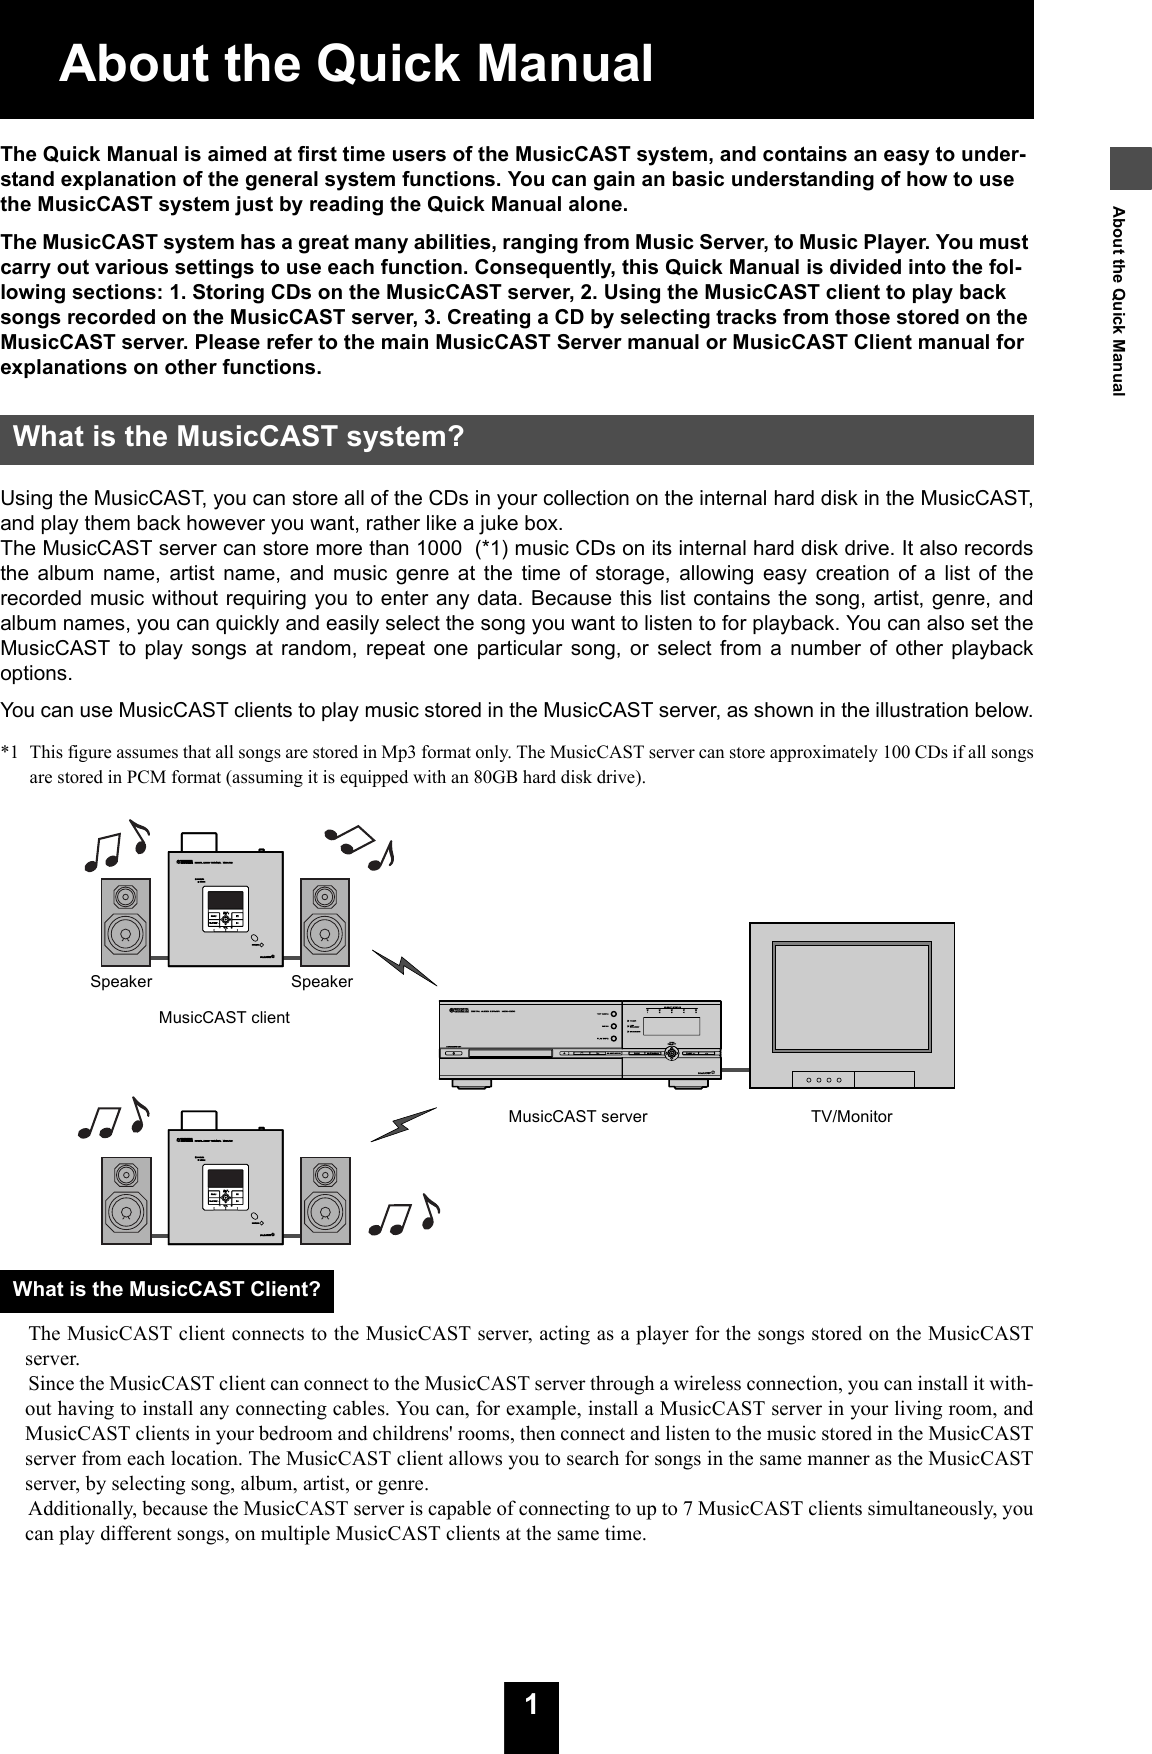 11About the Quick ManualAbout the Quick ManualThe Quick Manual is aimed at first time users of the MusicCAST system, and contains an easy to under-stand explanation of the general system functions. You can gain an basic understanding of how to use the MusicCAST system just by reading the Quick Manual alone.The MusicCAST system has a great many abilities, ranging from Music Server, to Music Player. You must carry out various settings to use each function. Consequently, this Quick Manual is divided into the fol-lowing sections: 1. Storing CDs on the MusicCAST server, 2. Using the MusicCAST client to play back songs recorded on the MusicCAST server, 3. Creating a CD by selecting tracks from those stored on the MusicCAST server. Please refer to the main MusicCAST Server manual or MusicCAST Client manual for explanations on other functions.Using the MusicCAST, you can store all of the CDs in your collection on the internal hard disk in the MusicCAST,and play them back however you want, rather like a juke box.The MusicCAST server can store more than 1000  (*1) music CDs on its internal hard disk drive. It also recordsthe album name, artist name, and music genre at the time of storage, allowing easy creation of a list of therecorded music without requiring you to enter any data. Because this list contains the song, artist, genre, andalbum names, you can quickly and easily select the song you want to listen to for playback. You can also set theMusicCAST to play songs at random, repeat one particular song, or select from a number of other playbackoptions.You can use MusicCAST clients to play music stored in the MusicCAST server, as shown in the illustration below.*1  This figure assumes that all songs are stored in Mp3 format only. The MusicCAST server can store approximately 100 CDs if all songsare stored in PCM format (assuming it is equipped with an 80GB hard disk drive).The MusicCAST client connects to the MusicCAST server, acting as a player for the songs stored on the MusicCASTserver.Since the MusicCAST client can connect to the MusicCAST server through a wireless connection, you can install it with-out having to install any connecting cables. You can, for example, install a MusicCAST server in your living room, andMusicCAST clients in your bedroom and childrens&apos; rooms, then connect and listen to the music stored in the MusicCASTserver from each location. The MusicCAST client allows you to search for songs in the same manner as the MusicCASTserver, by selecting song, album, artist, or genre.Additionally, because the MusicCAST server is capable of connecting to up to 7 MusicCAST clients simultaneously, youcan play different songs, on multiple MusicCAST clients at the same time.What is the MusicCAST system?What is the MusicCAST Client?MusicCAST clientSpeaker SpeakerMusicCAST server TV/Monitor